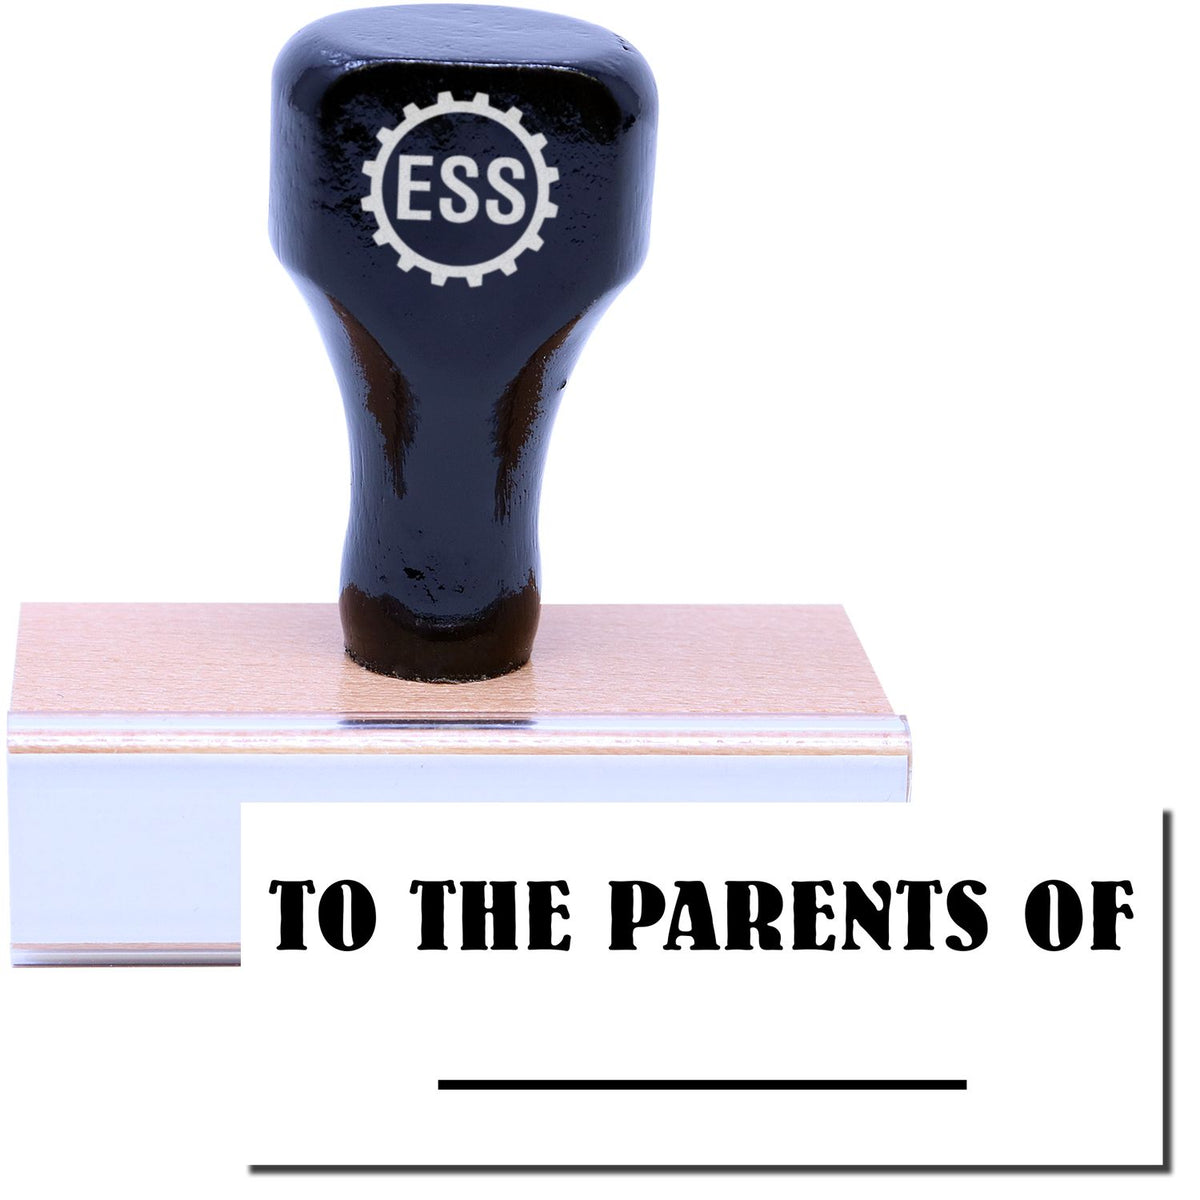 A stock office rubber stamp with a stamped image showing how the text &quot;TO THE PARENTS OF&quot; in a large font with a line underneath is displayed after stamping.